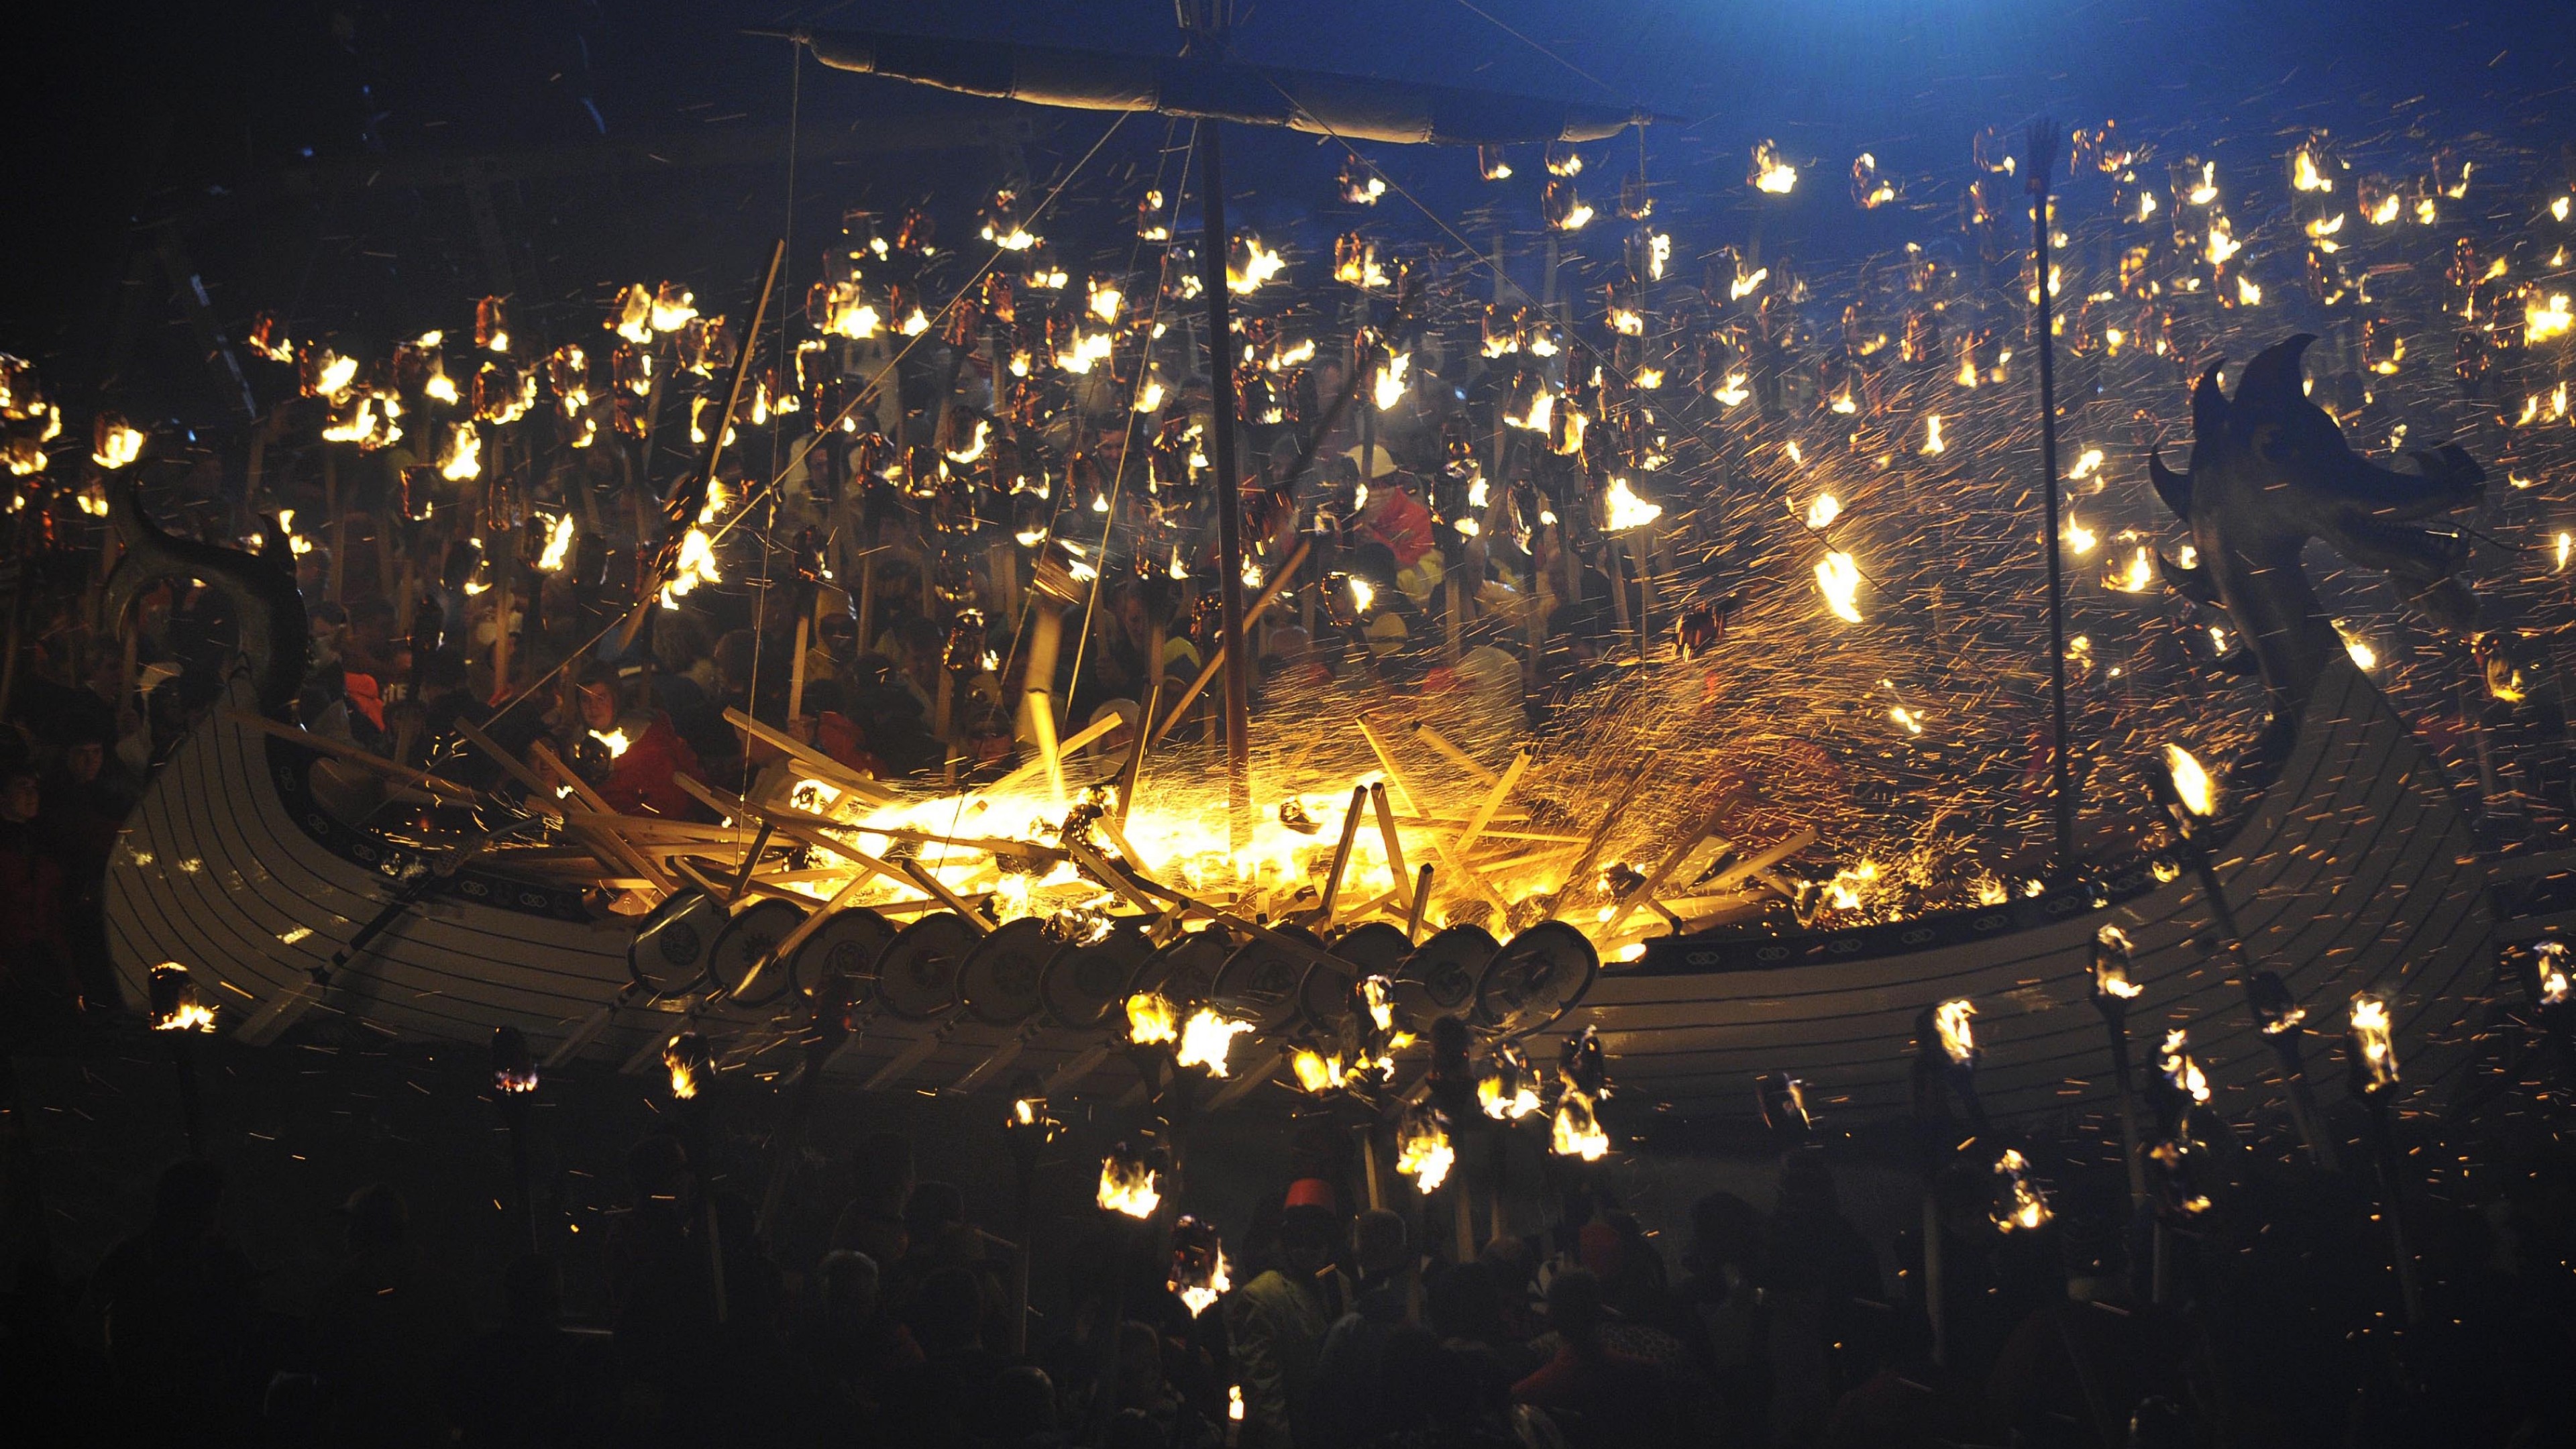 Wallpaper Up Helly Аa, Scotland, Festival, Fire, Torchlight Procession, Vikings, Event, Holidays